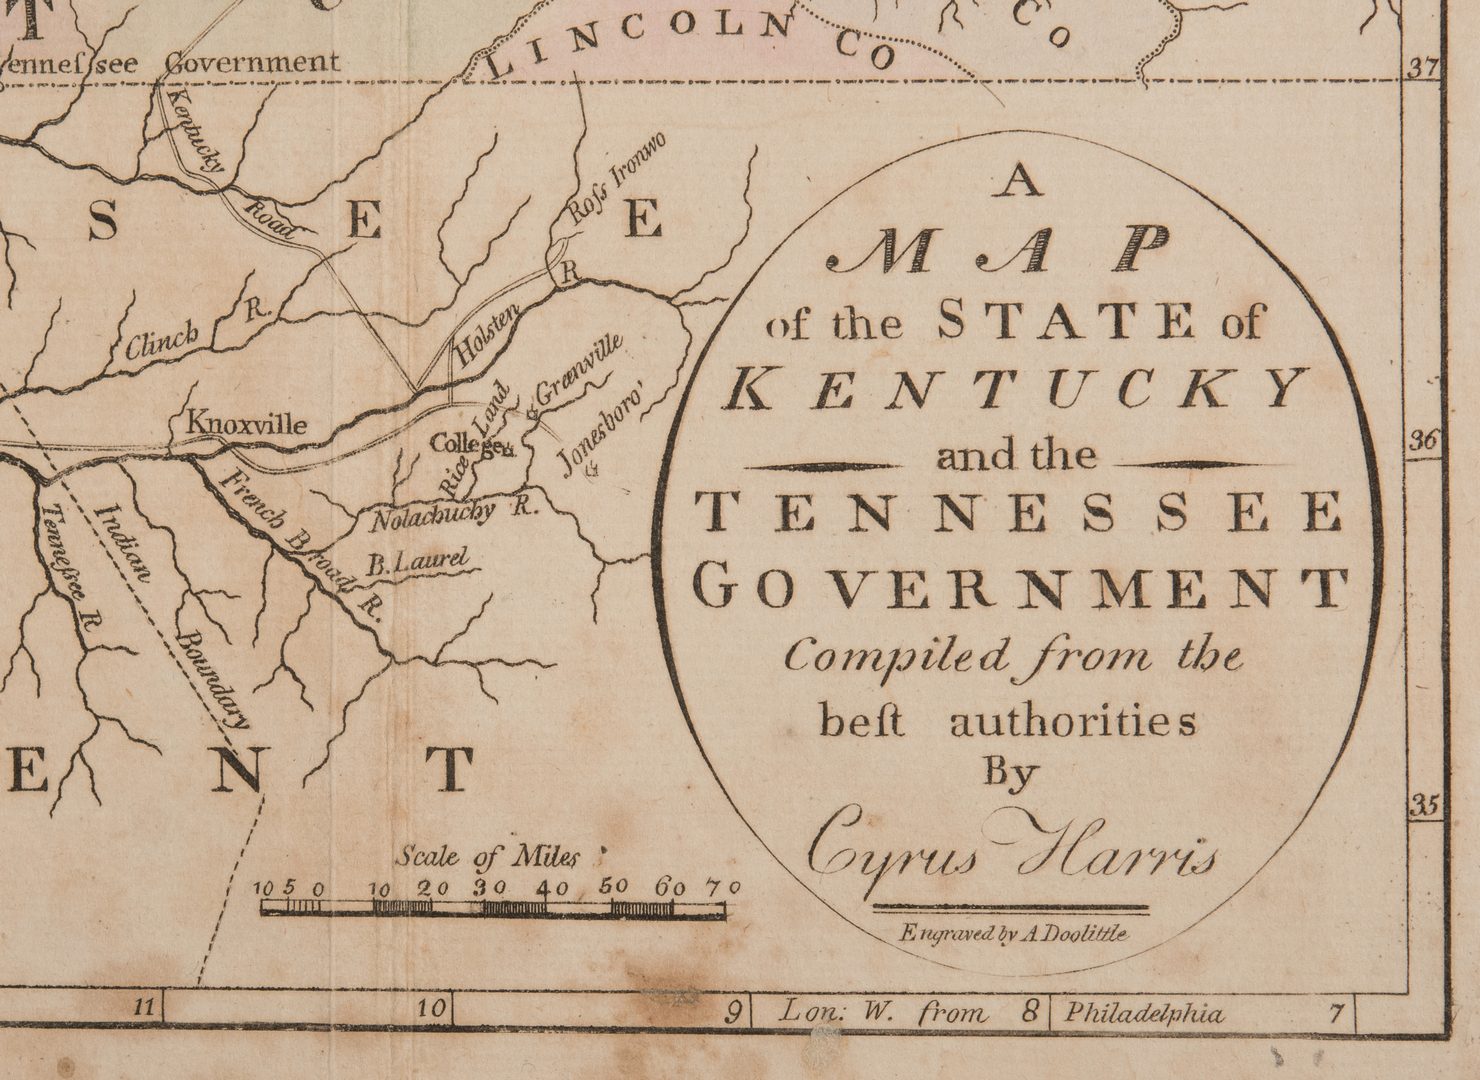 Lot 207: Kentucky and Tennessee Map, 1796 Harris